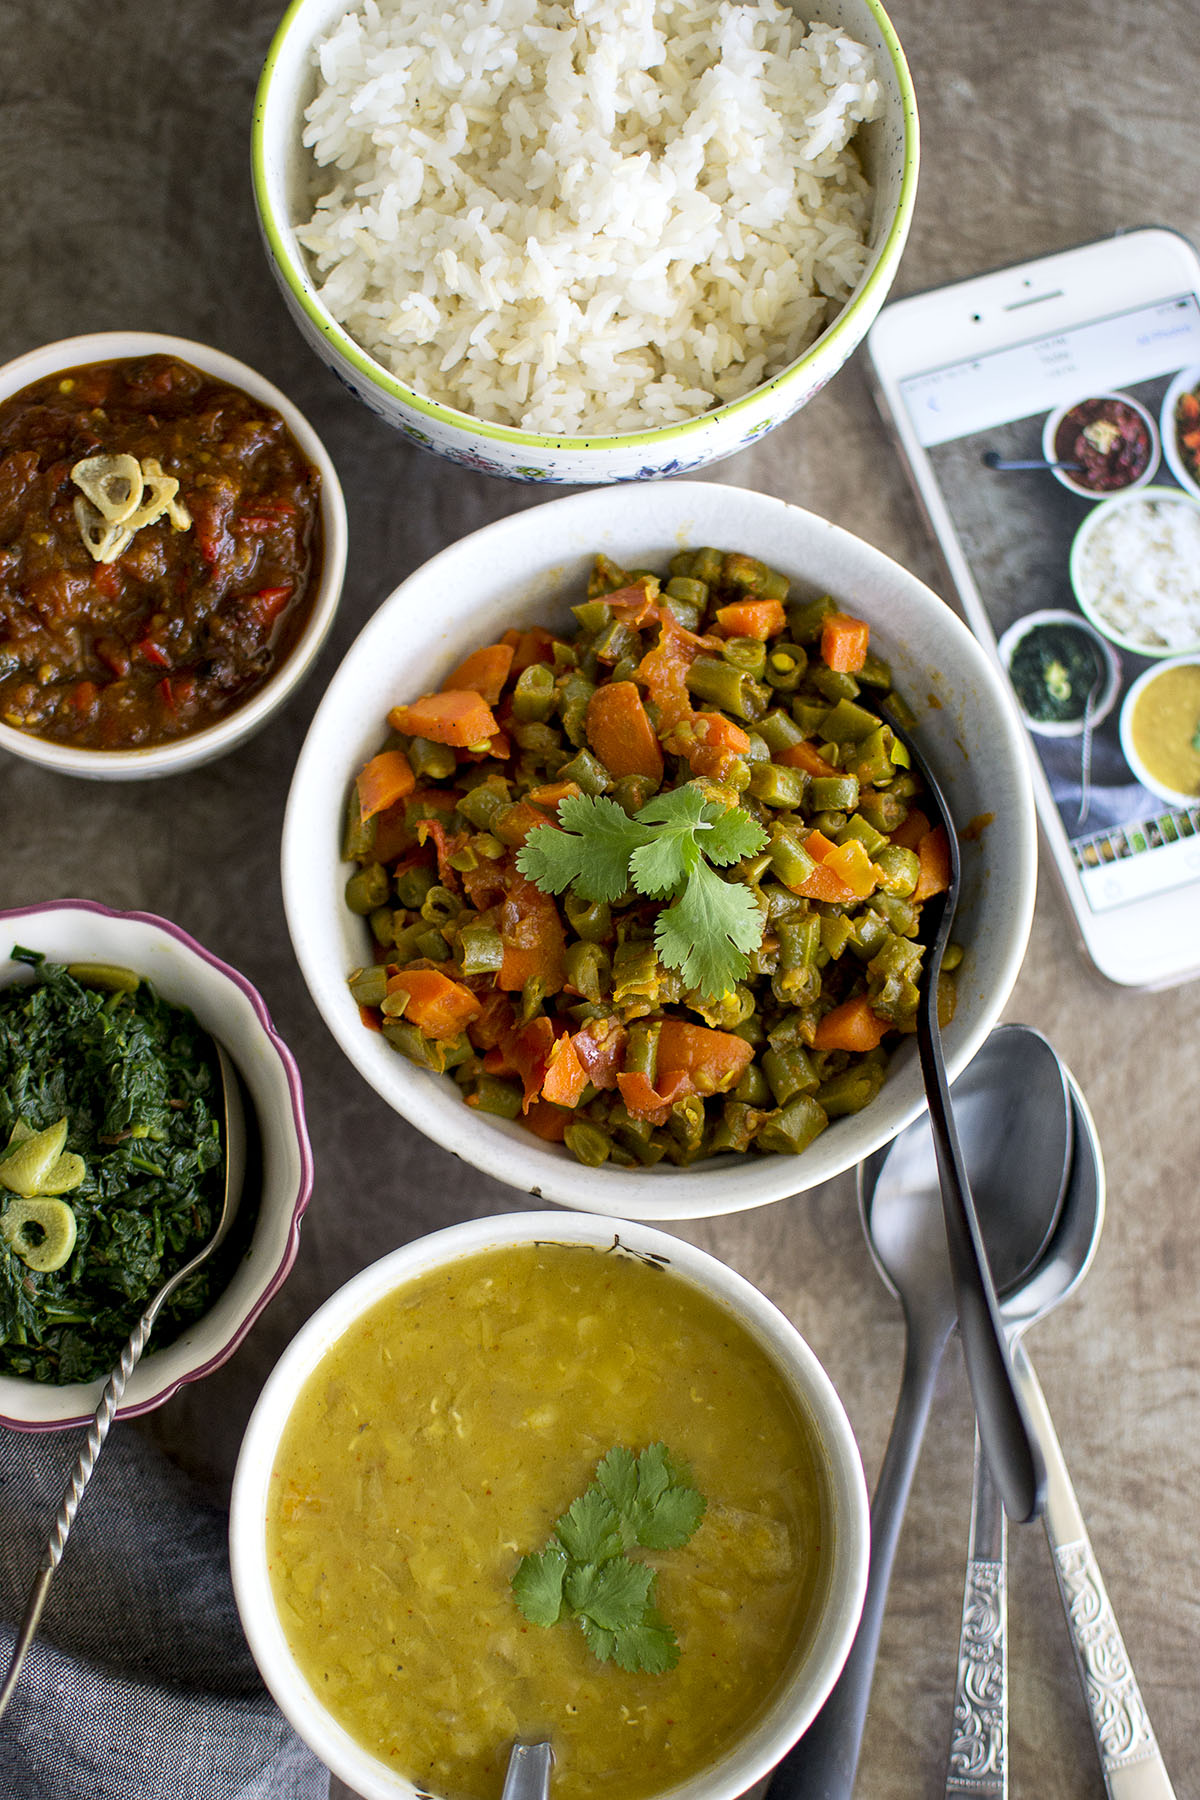 Rice, Mixed vegetable curry, dal, spinach, tomato chutney